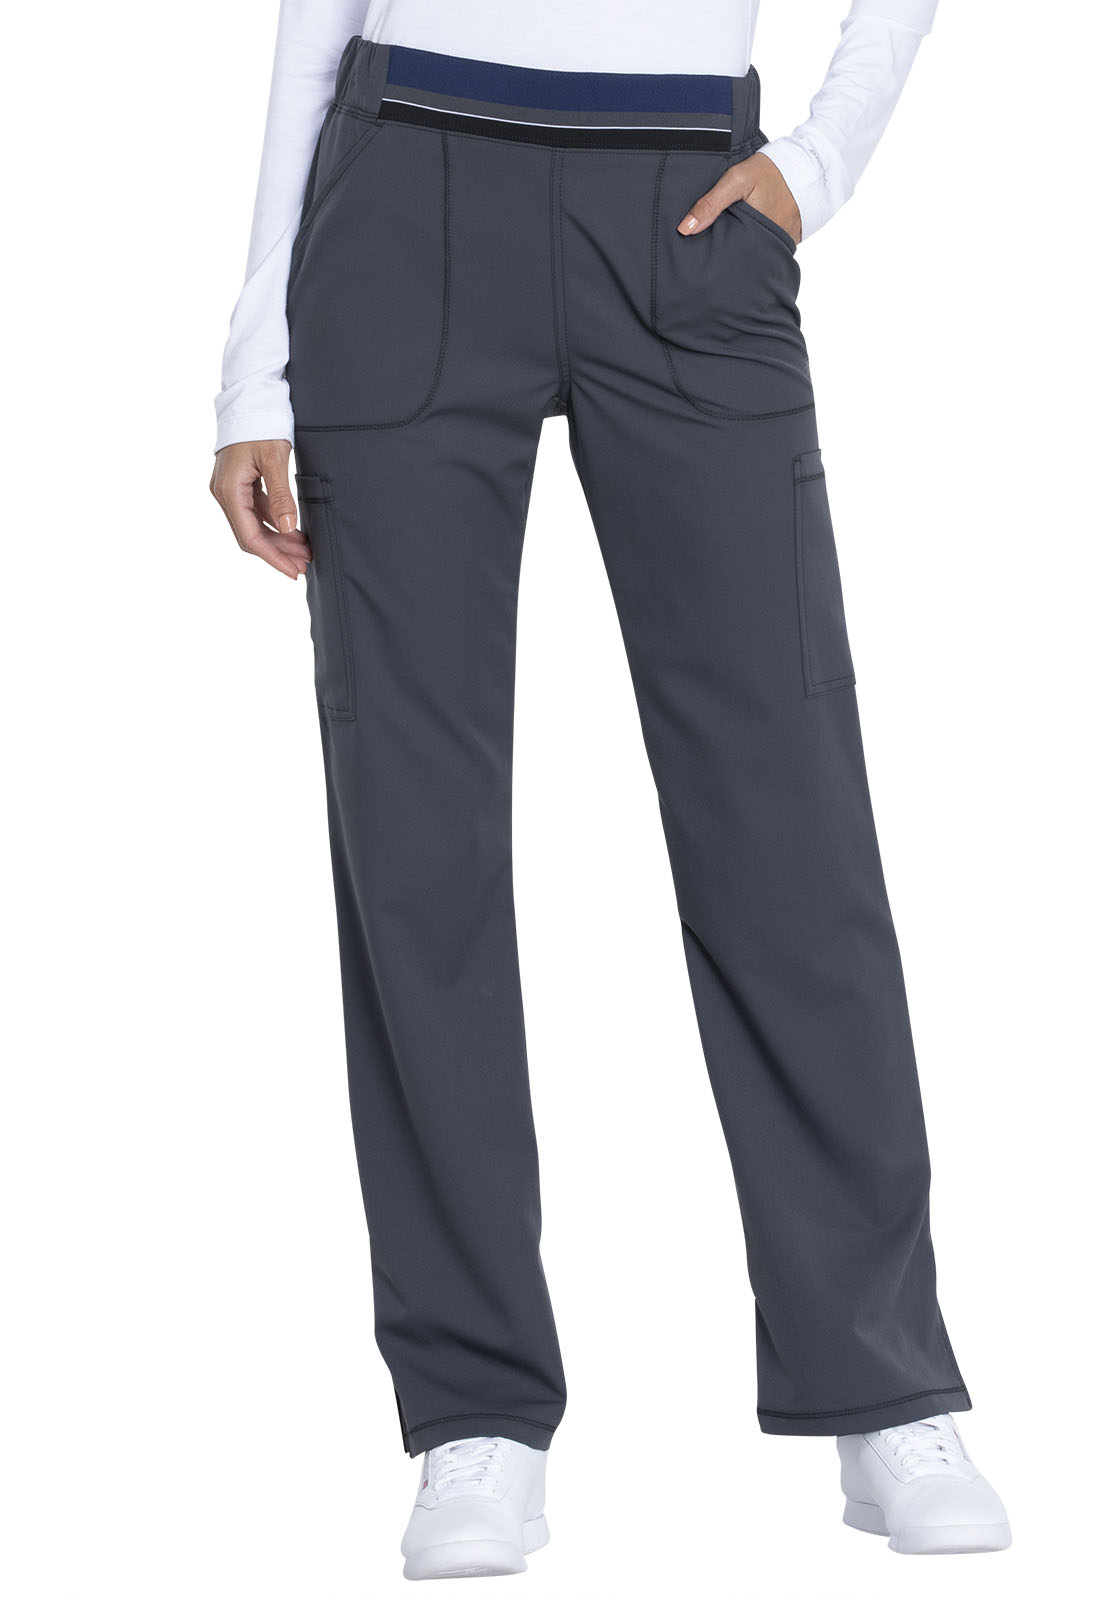 Details about   Black Dickies Scrubs Dynamix Mid Rise Flare Leg Pull On Pants DK115 BLK